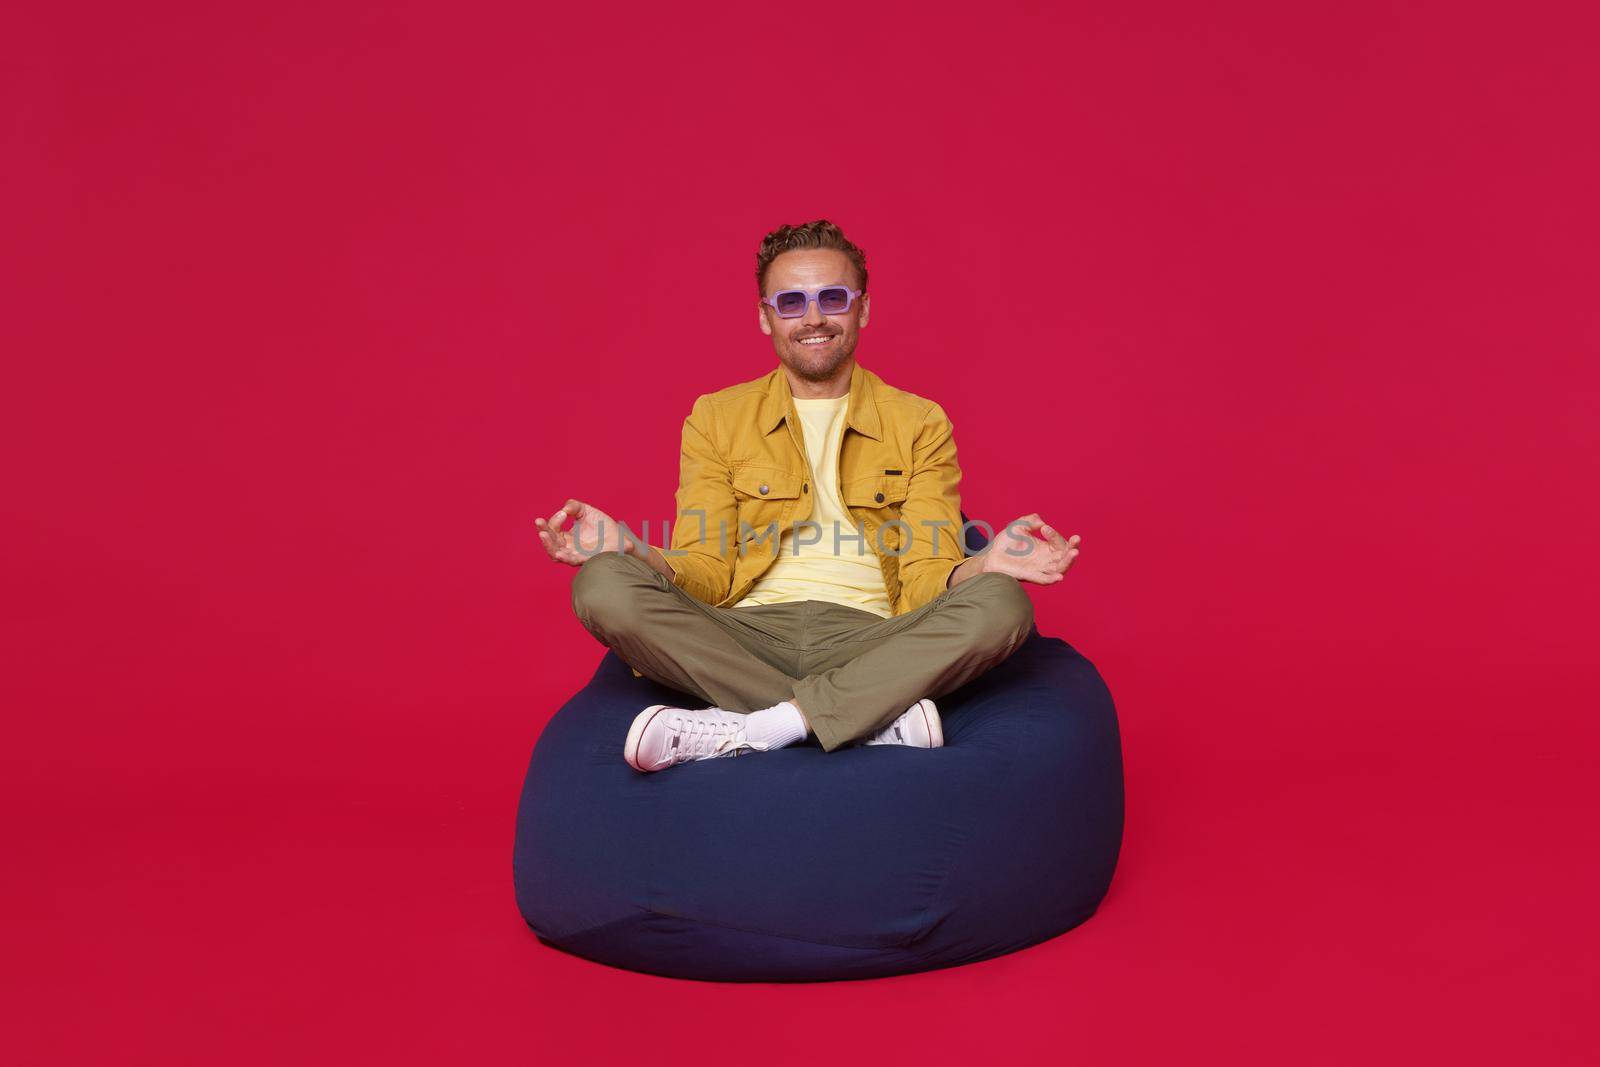 Zen man. Handsome calm focused guy sitting on bag chair in meditating lotus pose wearing blue shades, sunglasses and casual outfit isolated on red background. Happy calm freelancer enjoy free time.